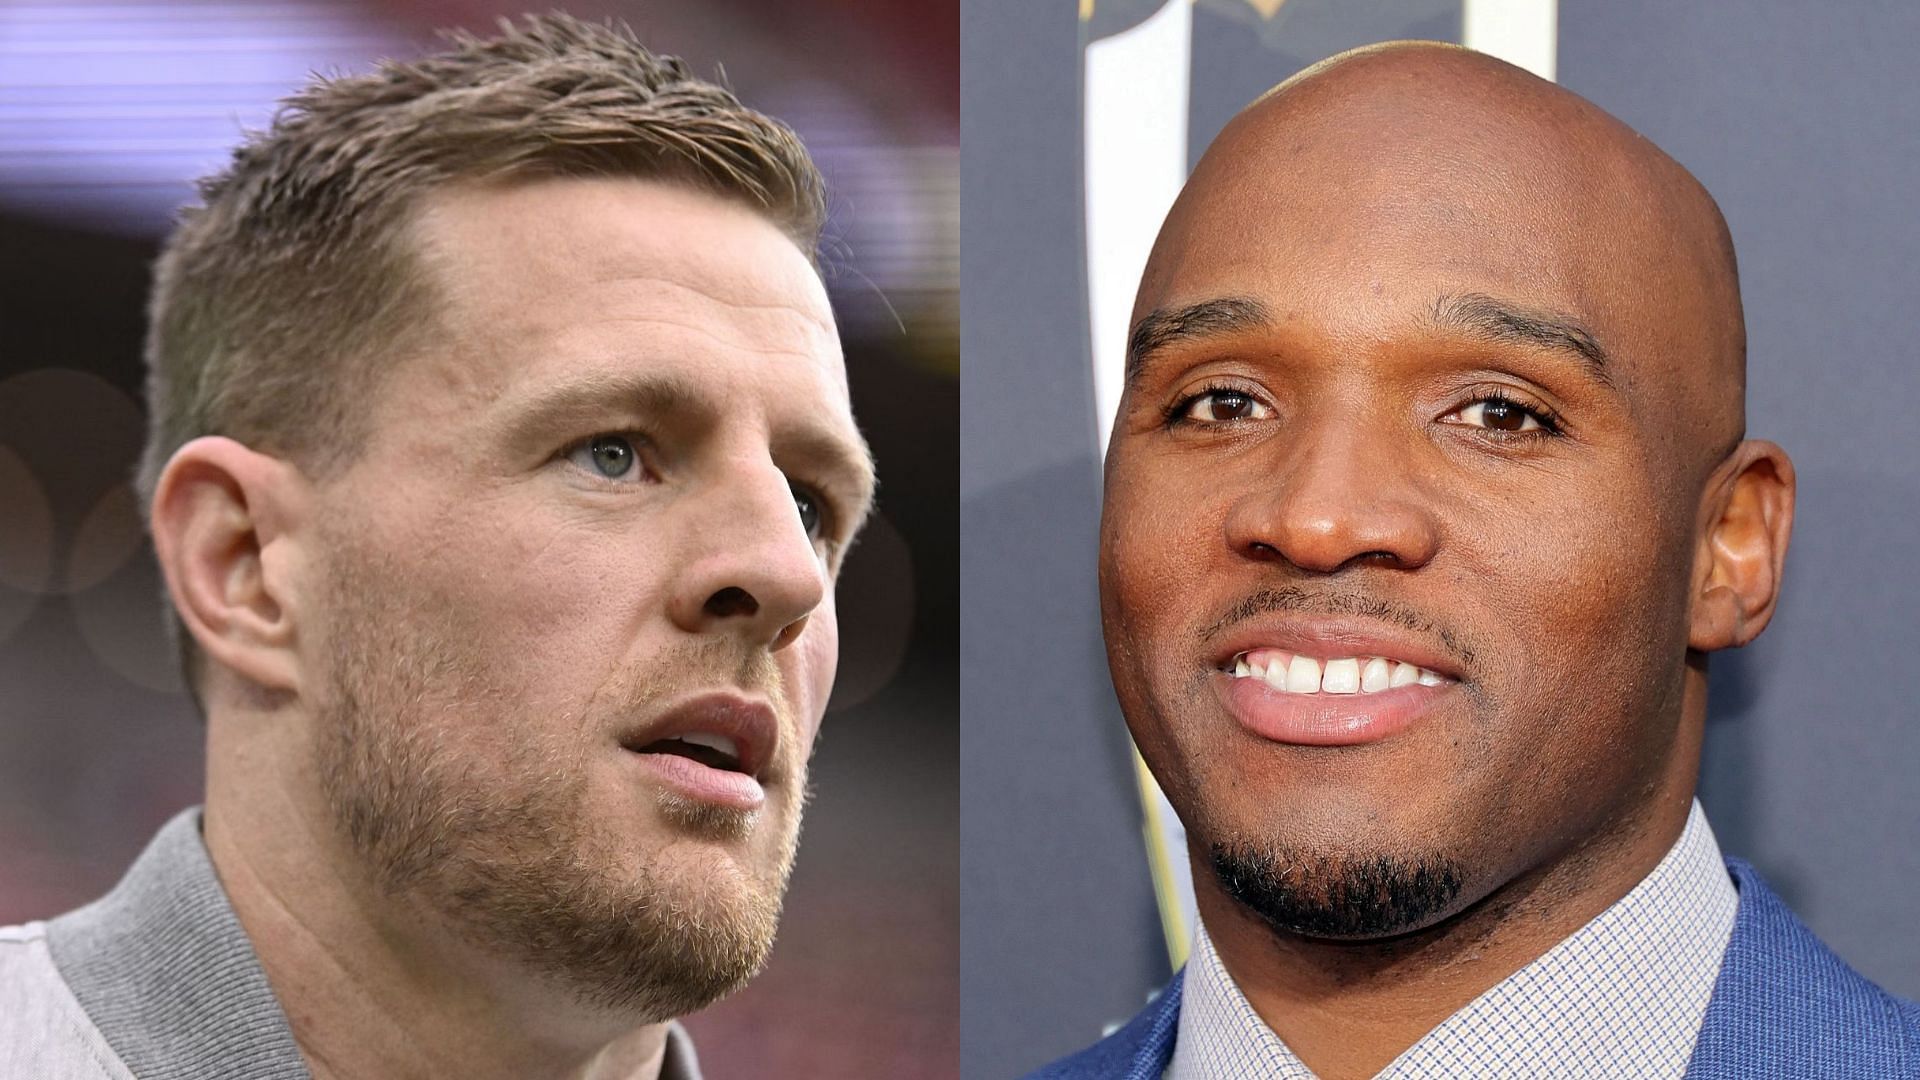 JJ Watt says he will unretire only if DeMeco Ryans wants him to